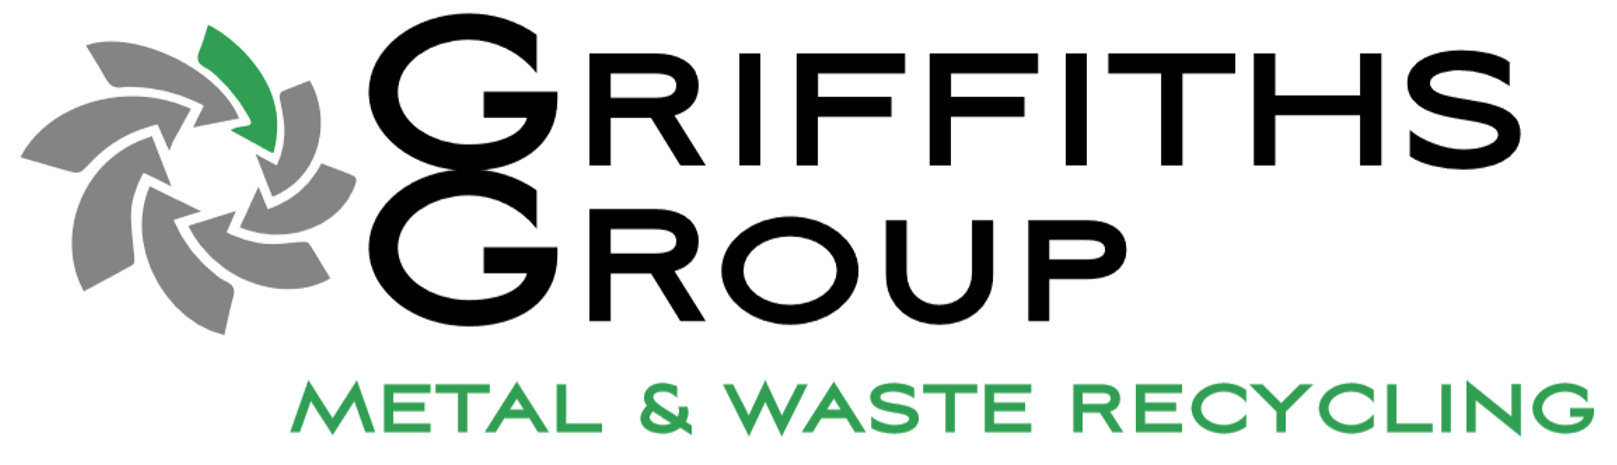 The Griffiths Group logo